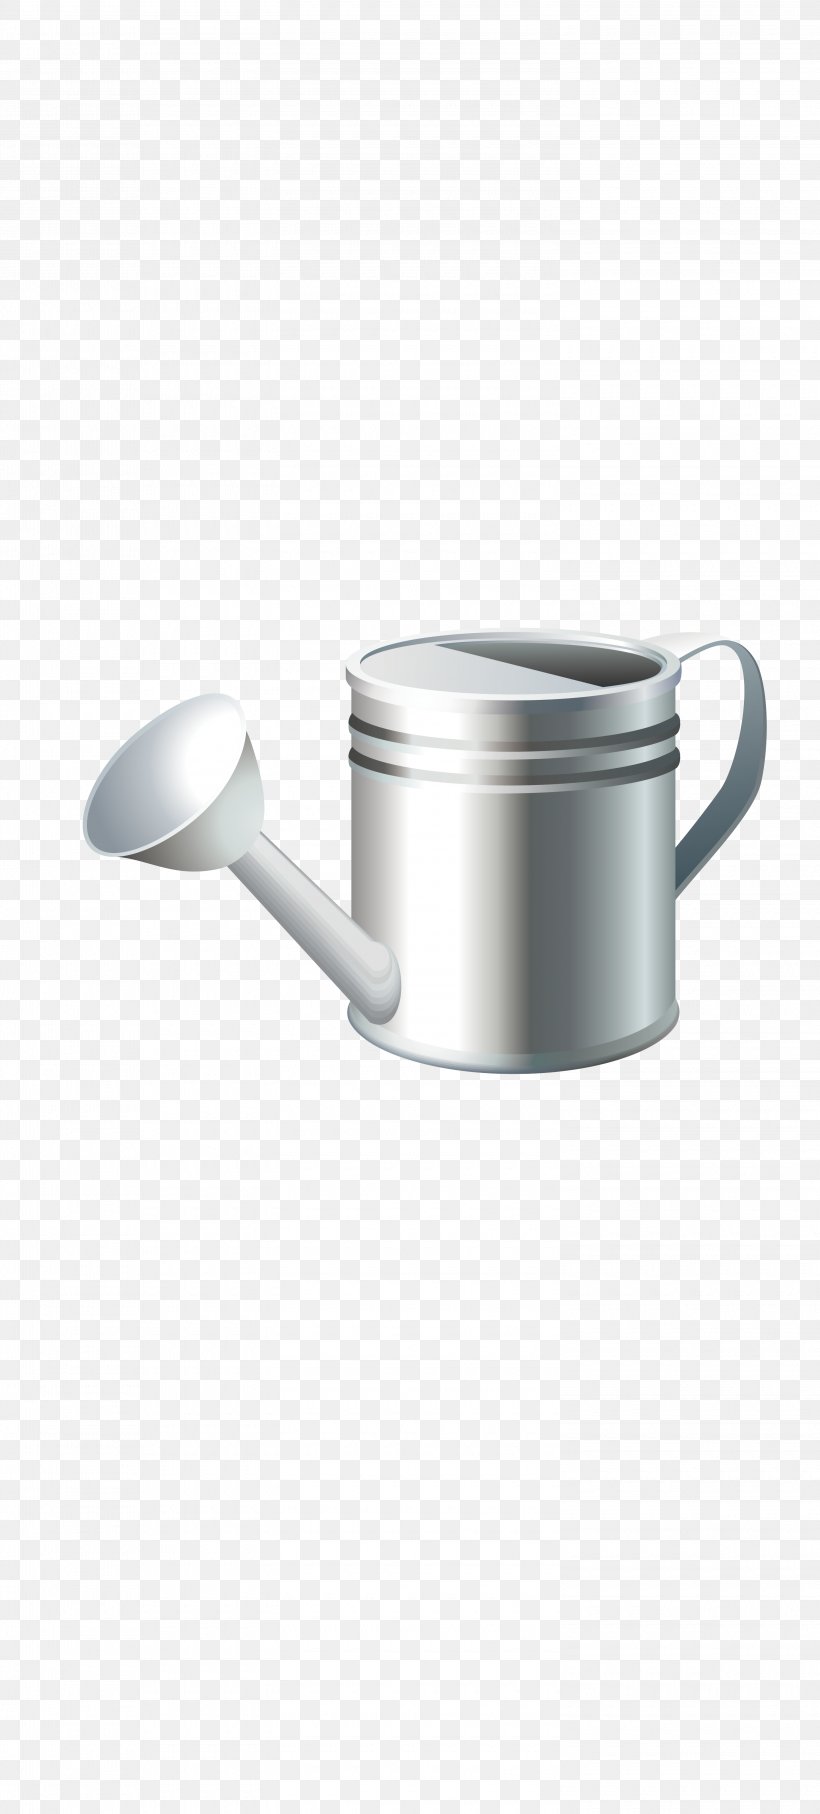 Kettle Water Bottle, PNG, 3000x6637px, Kettle, Cookware, Cookware And Bakeware, Cup, Lid Download Free